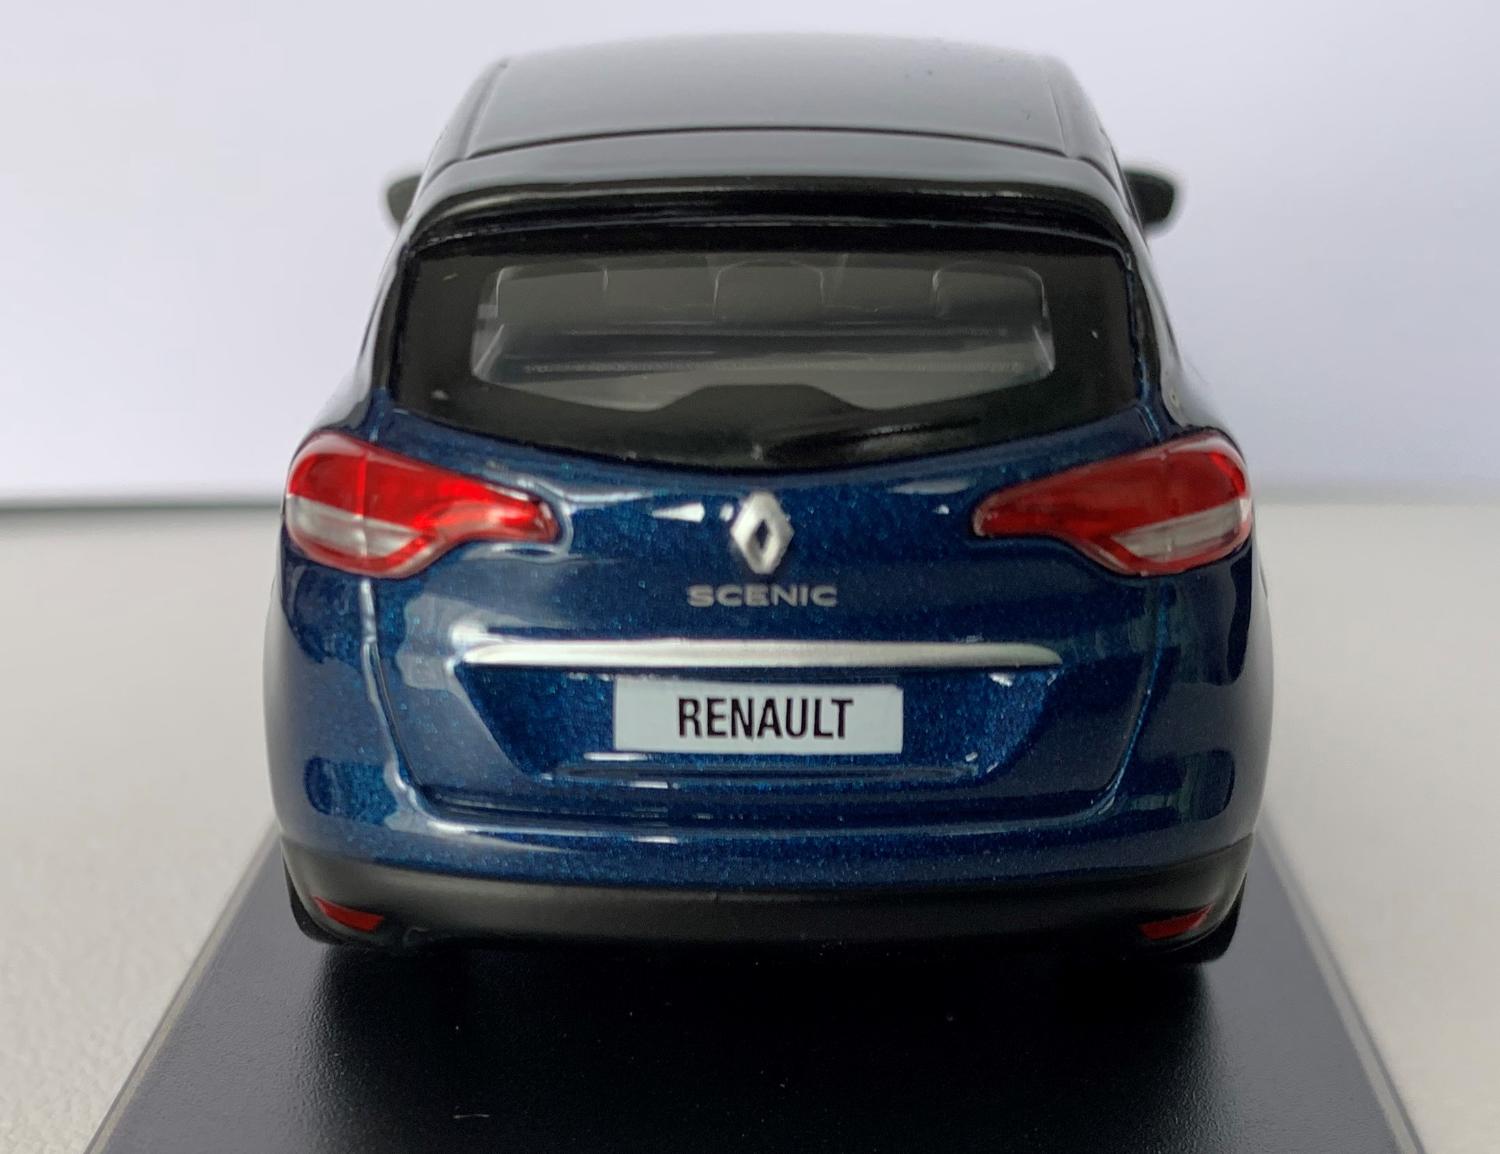 Renault Scenic 2016 in cosmos blue / black 1:43 scale model from Norev